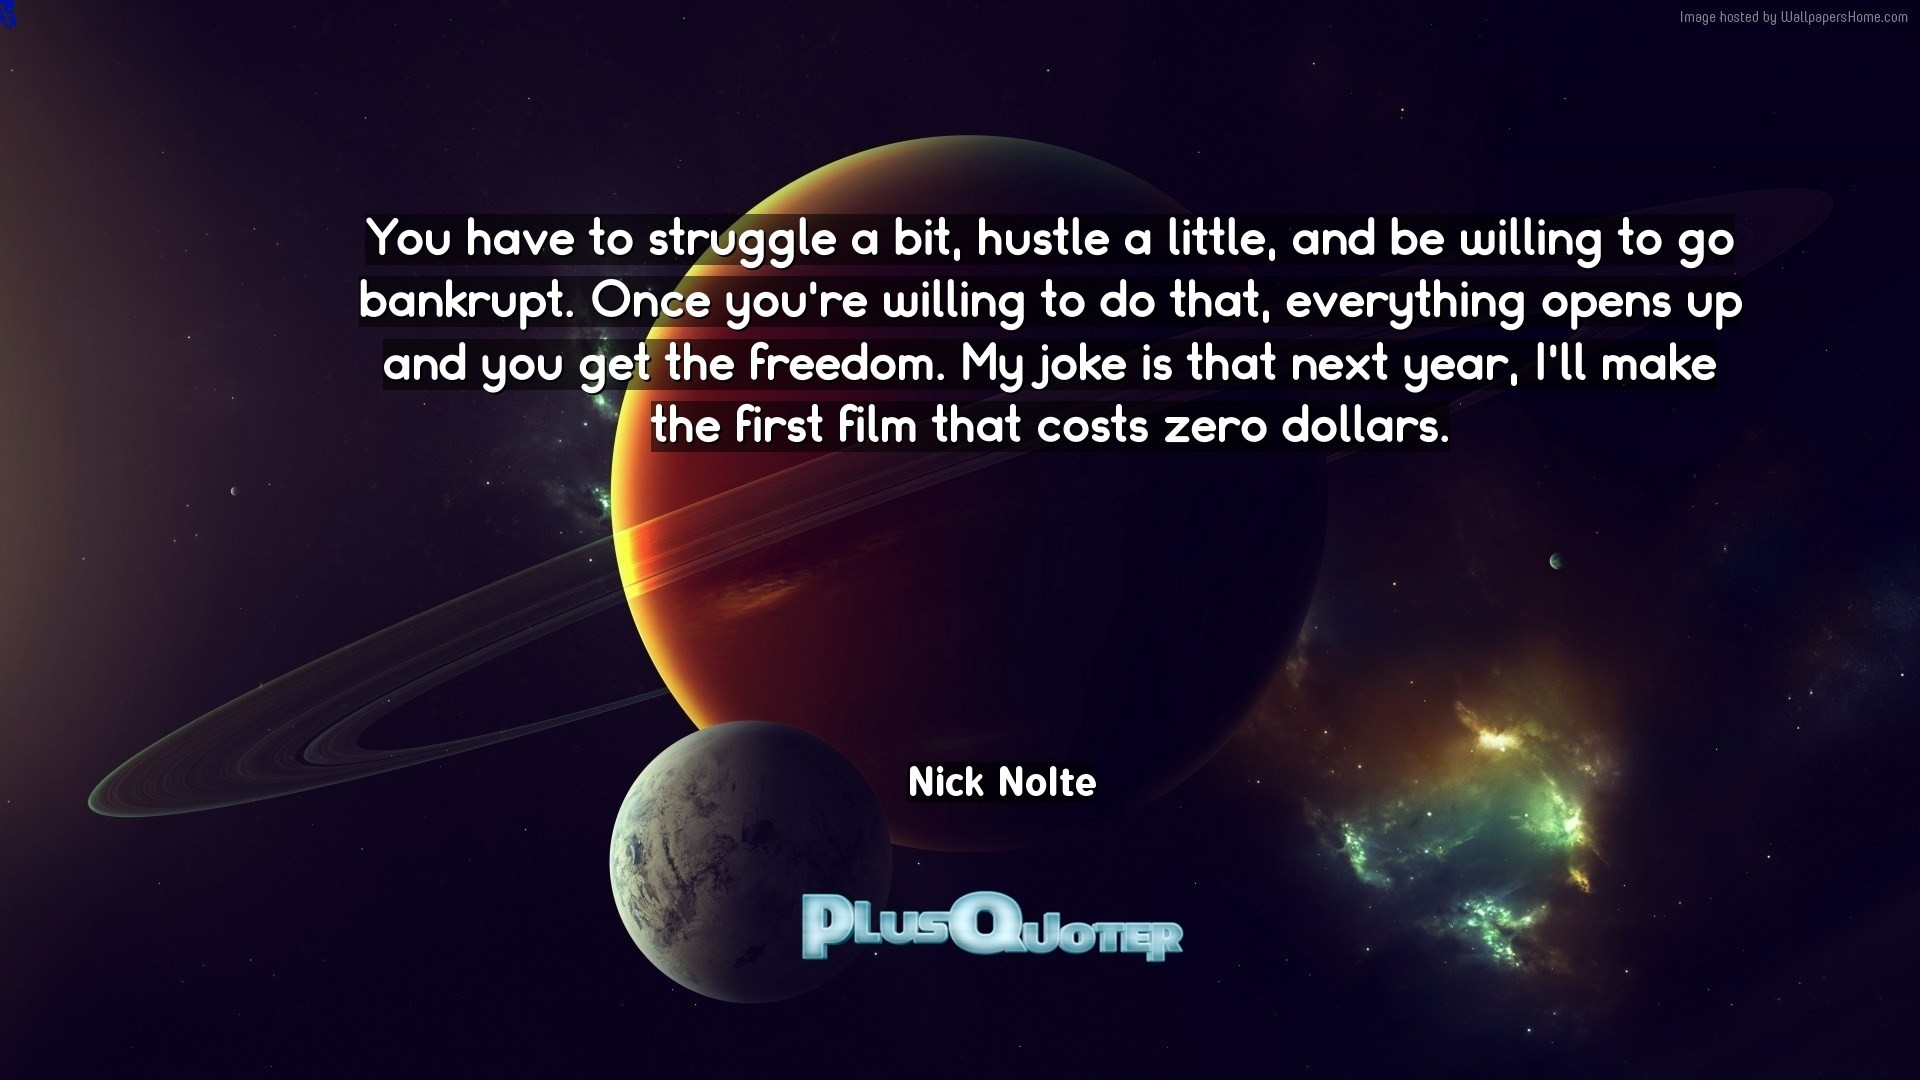 1920x1080 Download Wallpaper with inspirational Quotes- "You have to struggle a bit,  hustle a